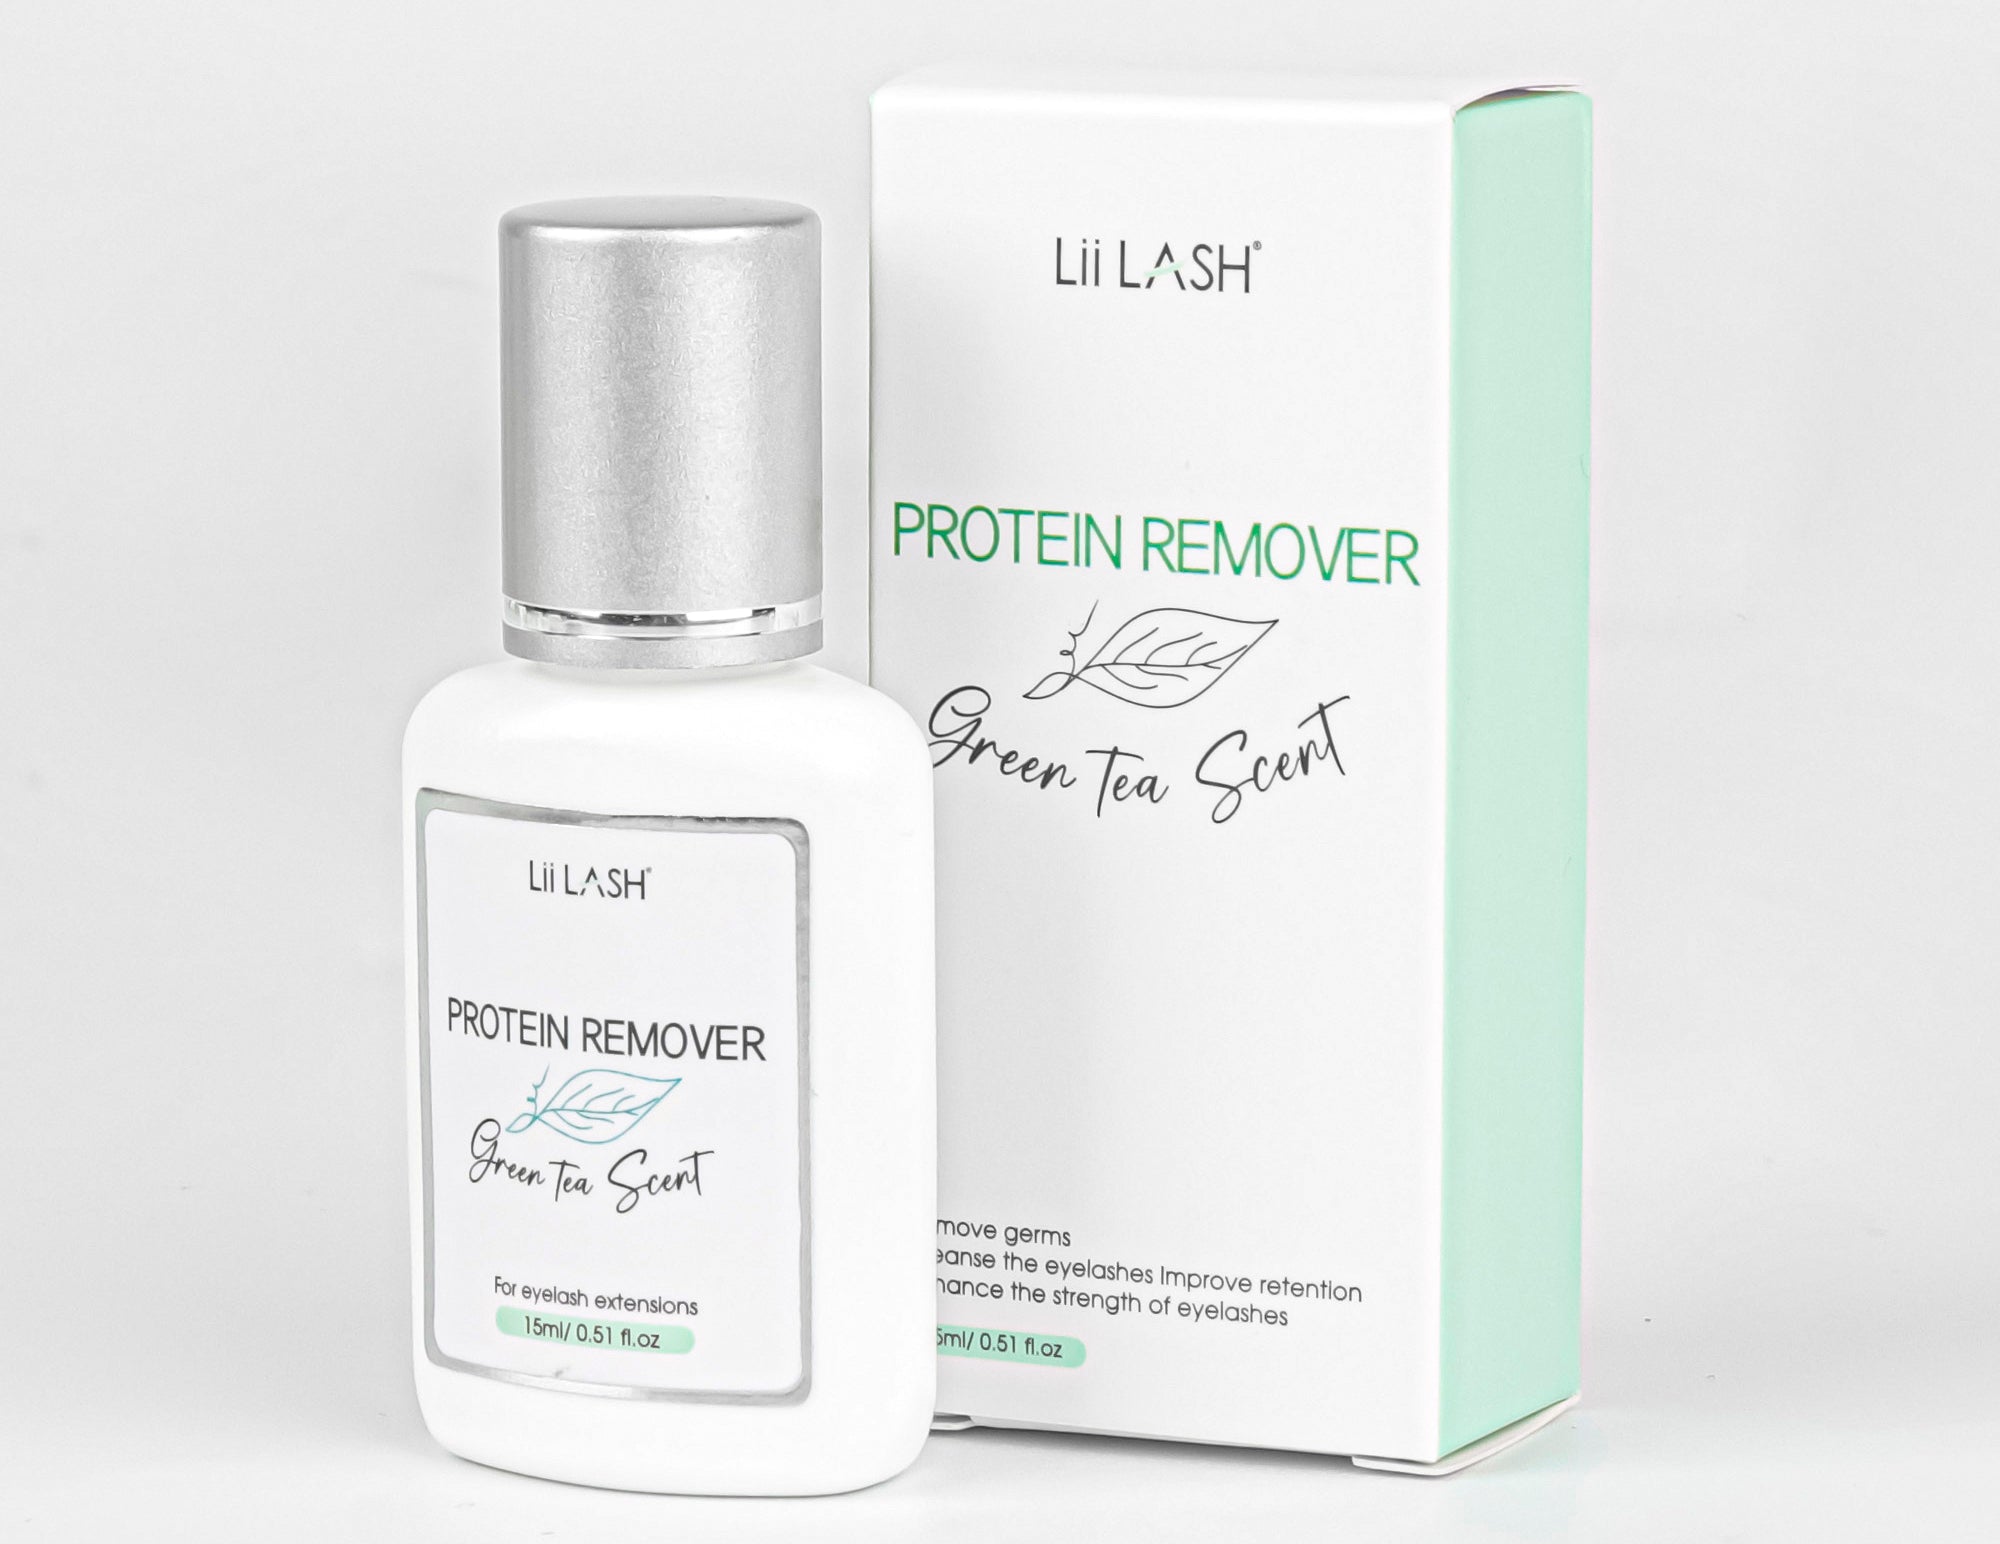 A bottle of protein remover placed beside lash primer and cleanser bottles, indicating they form a recommended trio for effective lash care